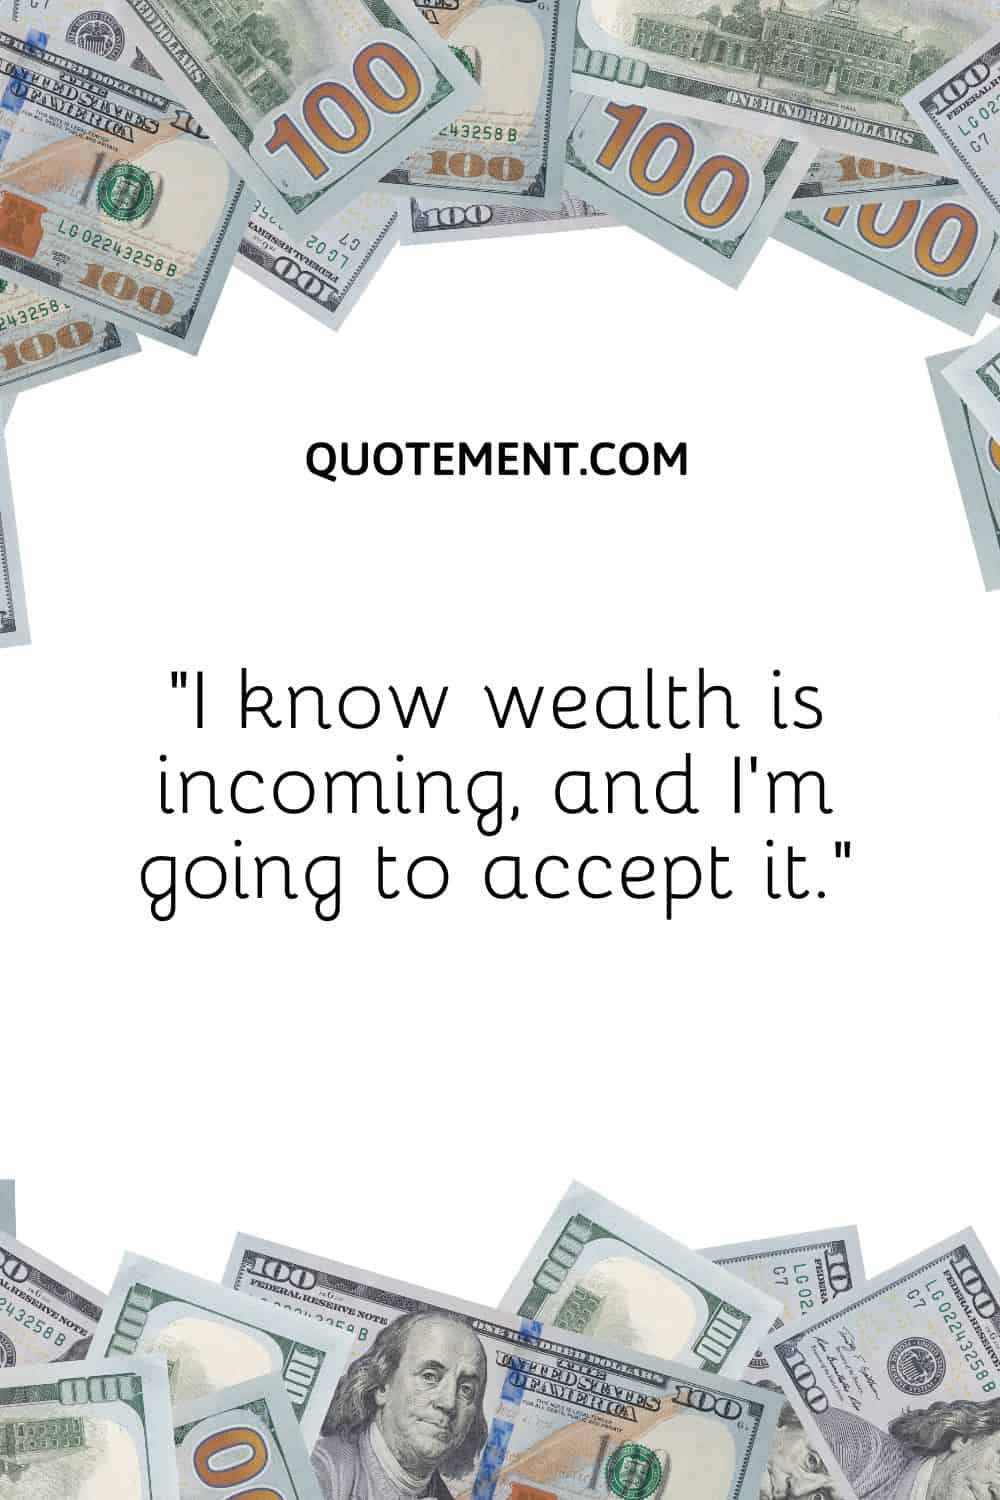 “I know wealth is incoming, and I’m going to accept it.”